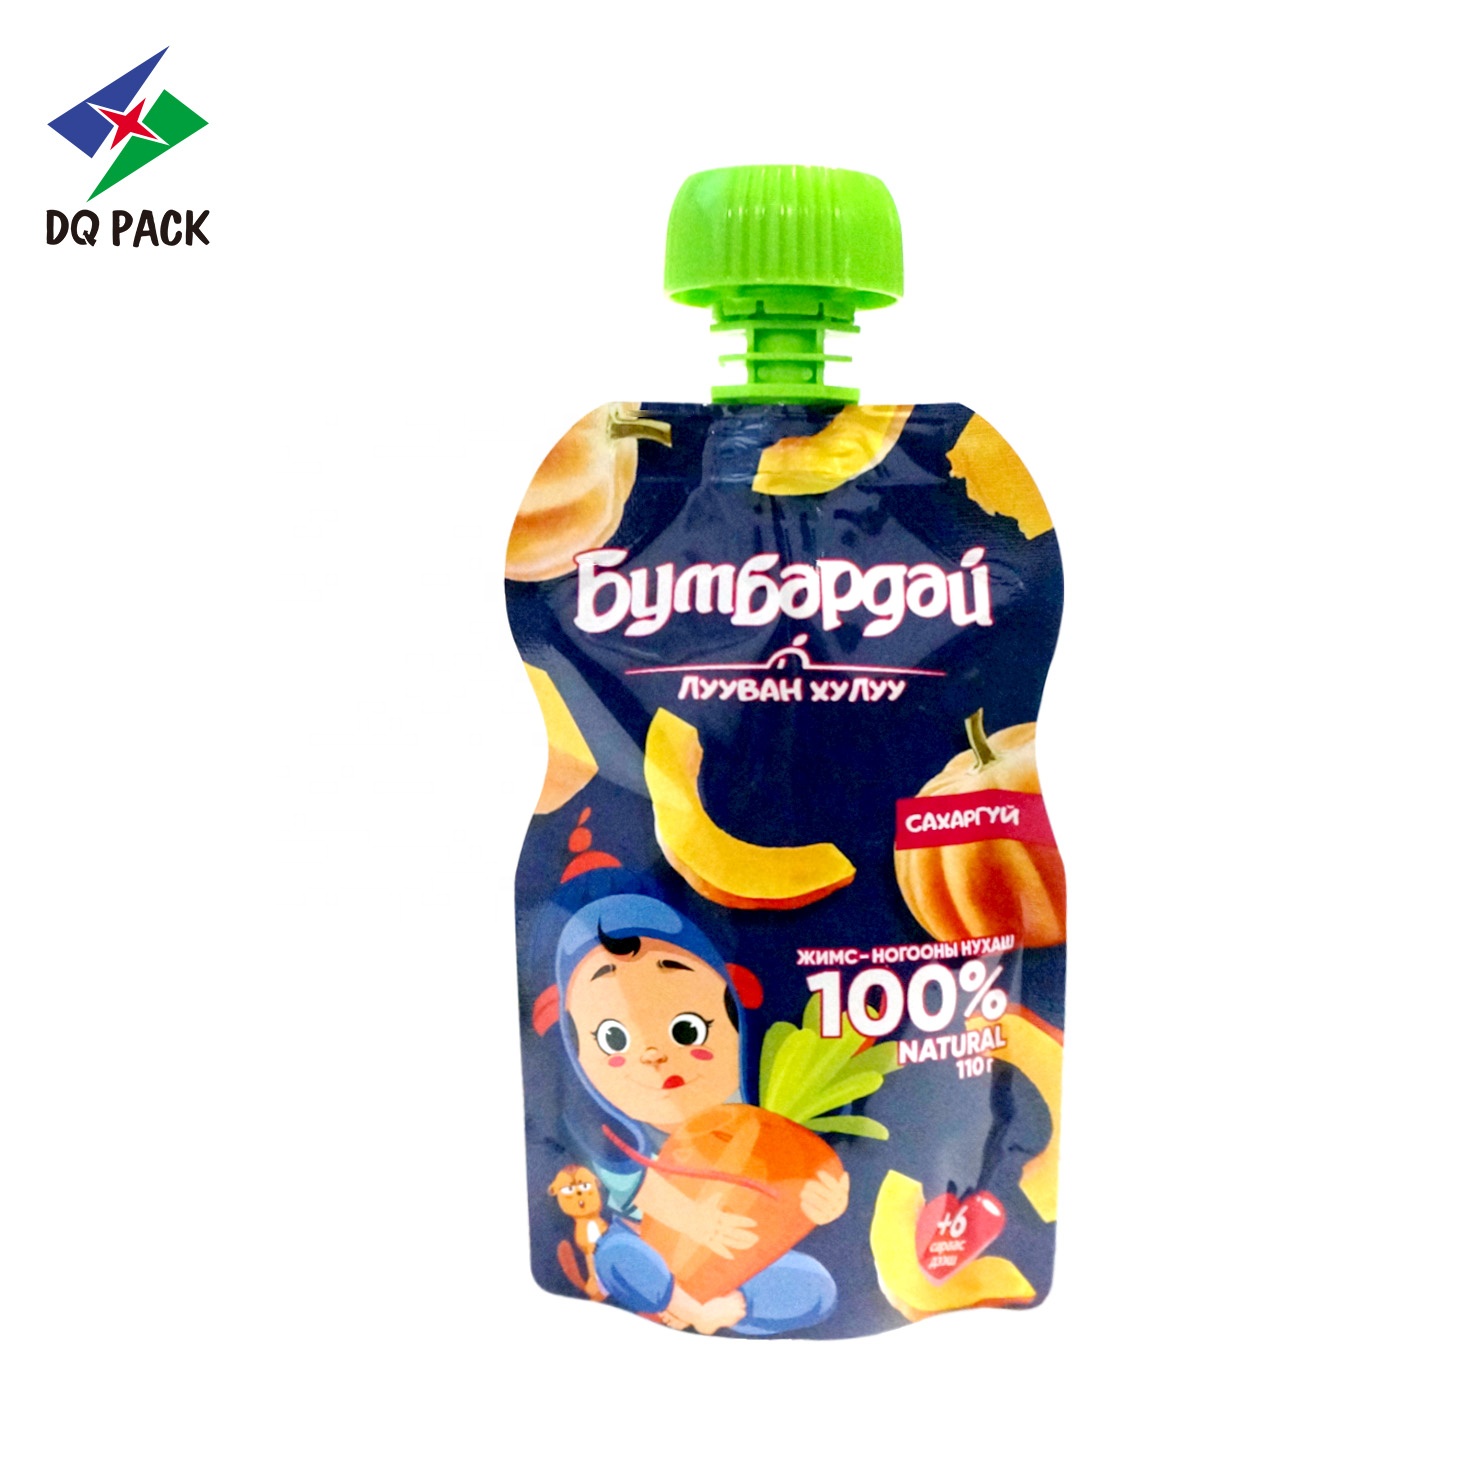 DQ PACK Baby Food Juice Beverage Packaging Spout Pouch